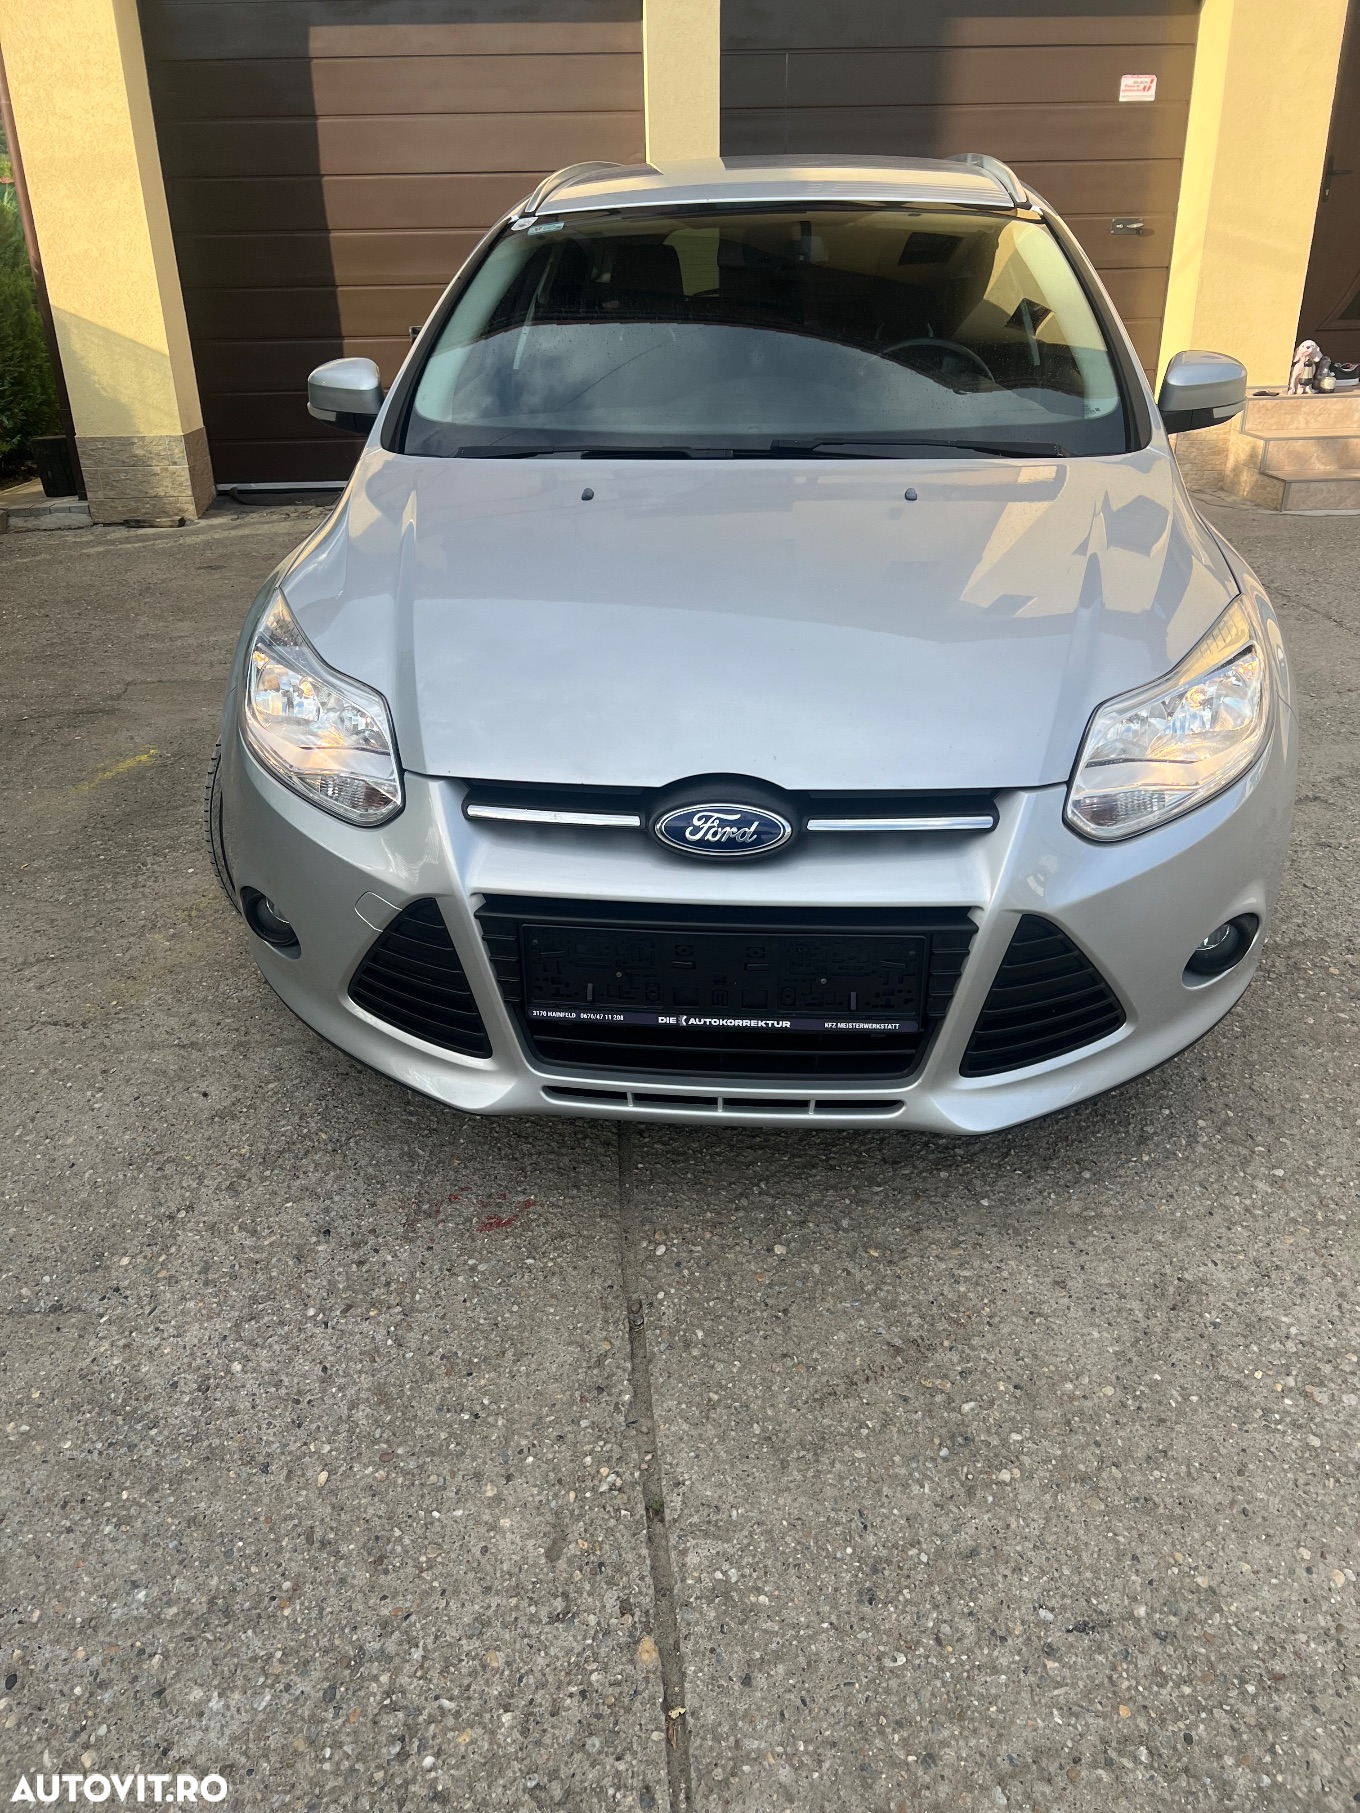 Ford Focus 1.6 TDCi DPF Start-Stopp-System Business - 2